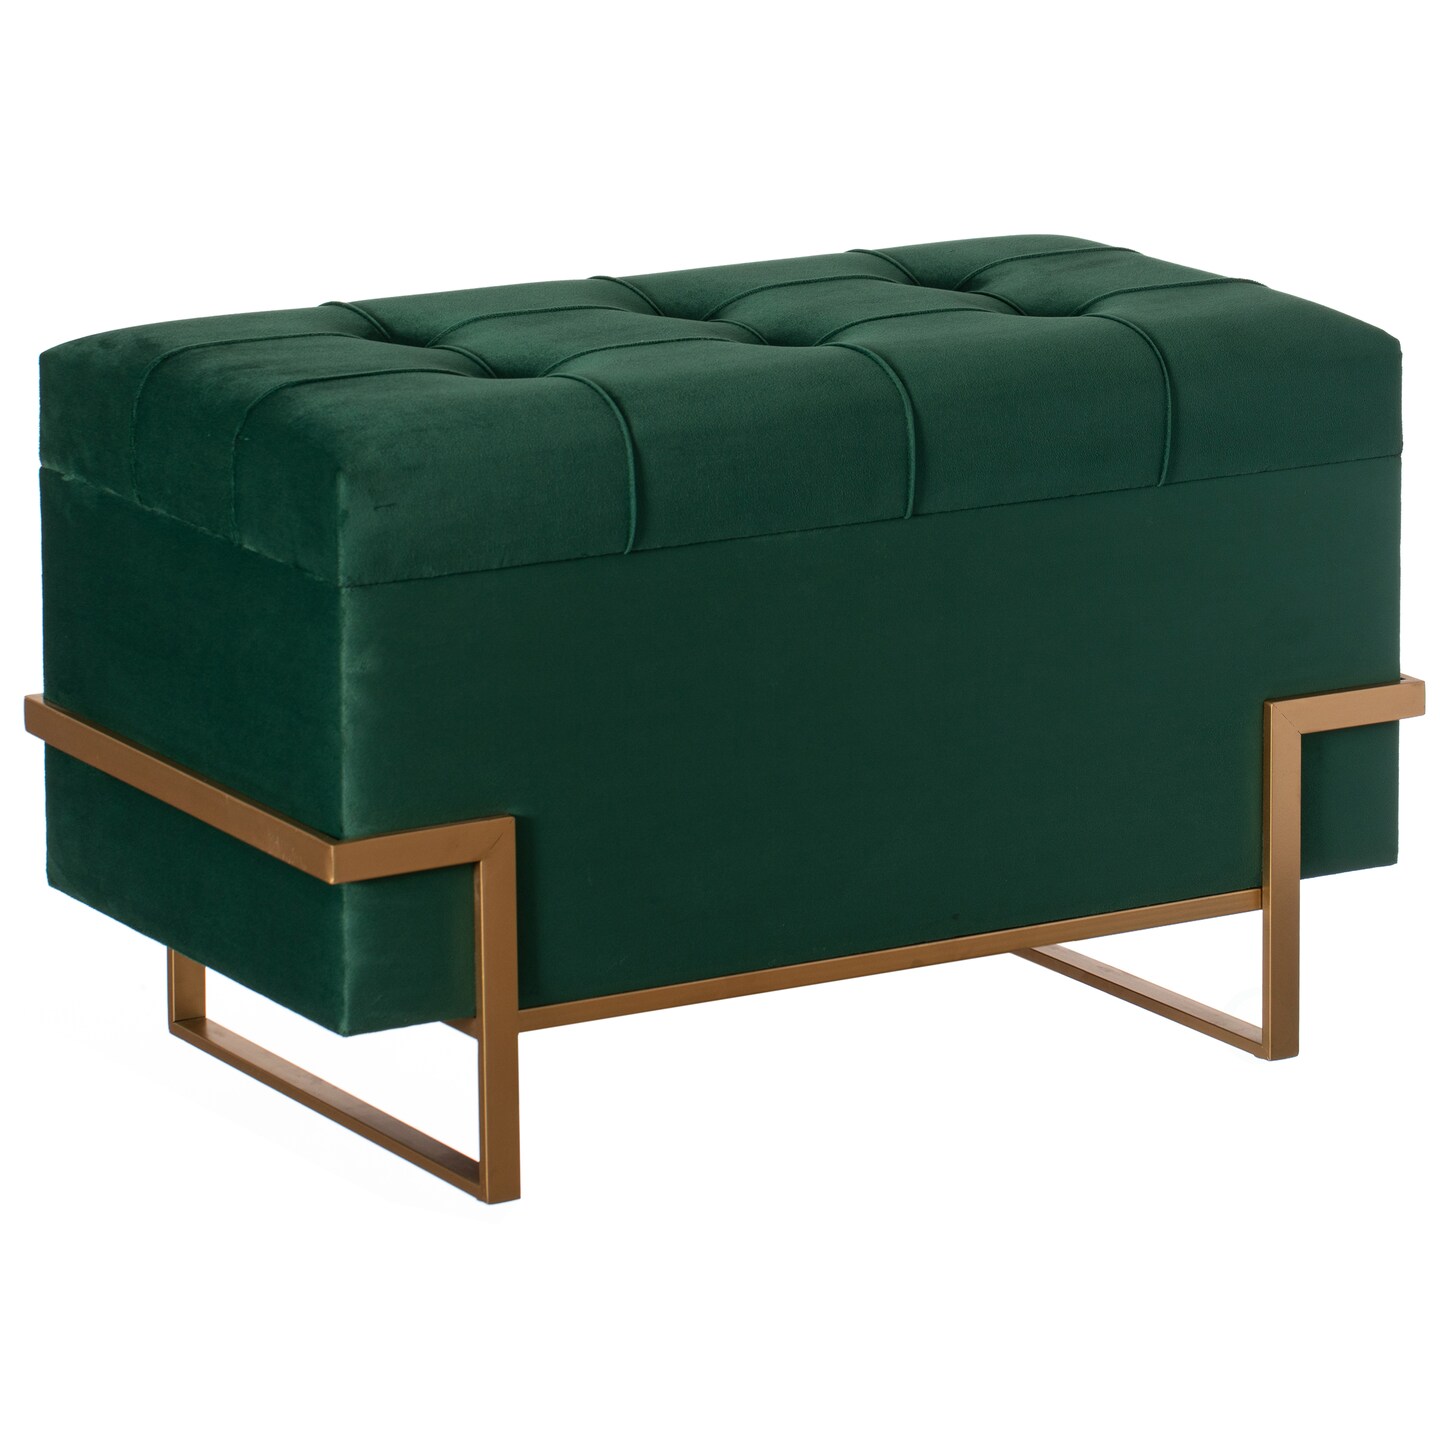 Rectangle Velvet Storage Ottoman Stool Box with Abstract Golden Legs | Decorative Sitting Bench for Living Room Home Decor with Unique Base Support